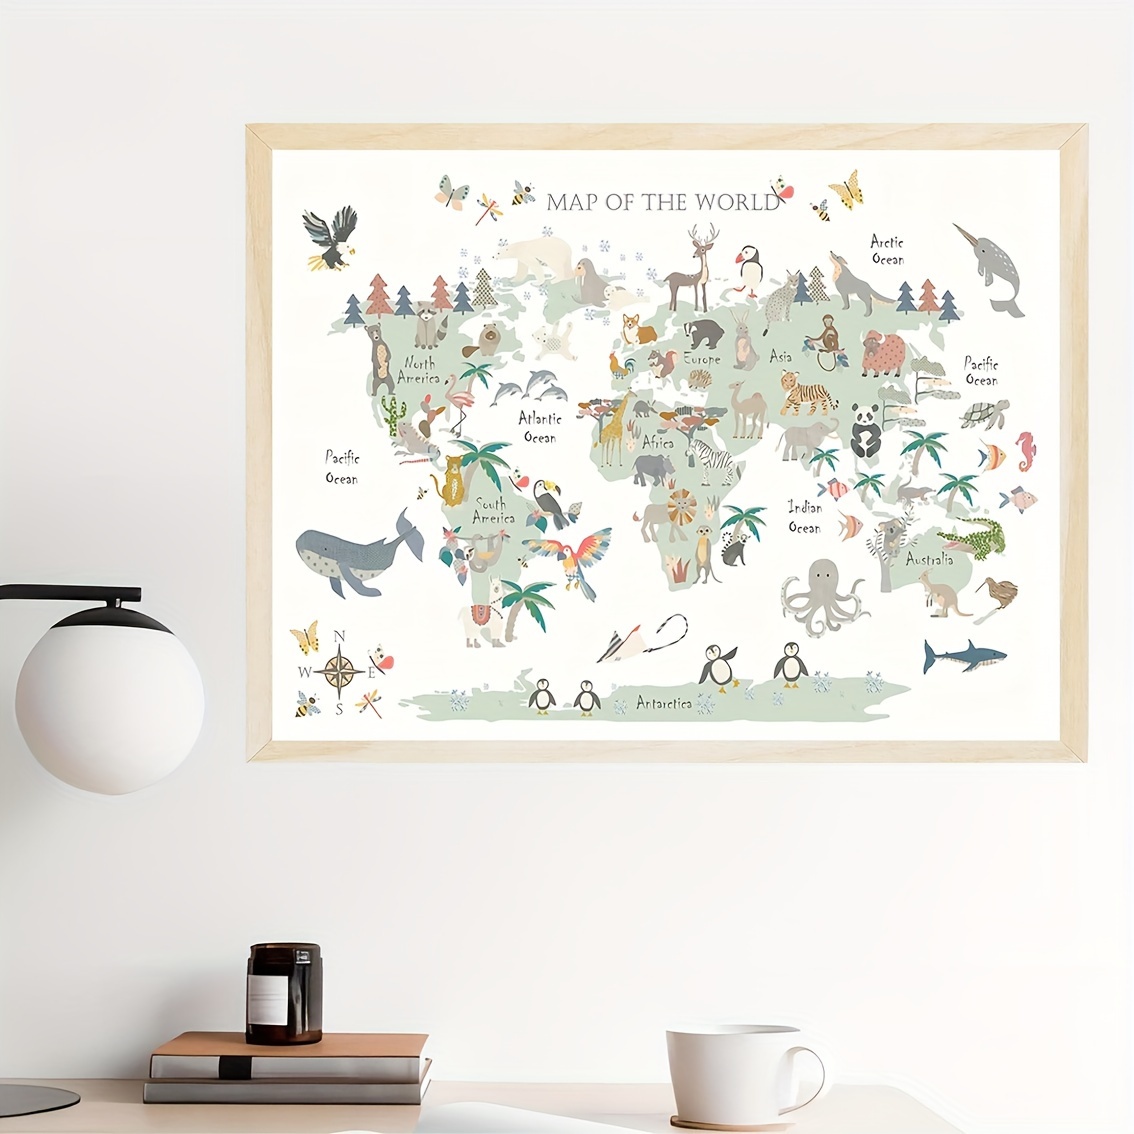 

Children's Animal World Map Canvas Print - Educational Kids Playroom Wall Art, Frameless World Map For Nursery, Modern Canvas Painting Poster For Bedroom, Home, Office Decor - 11.8x15.7 Inches